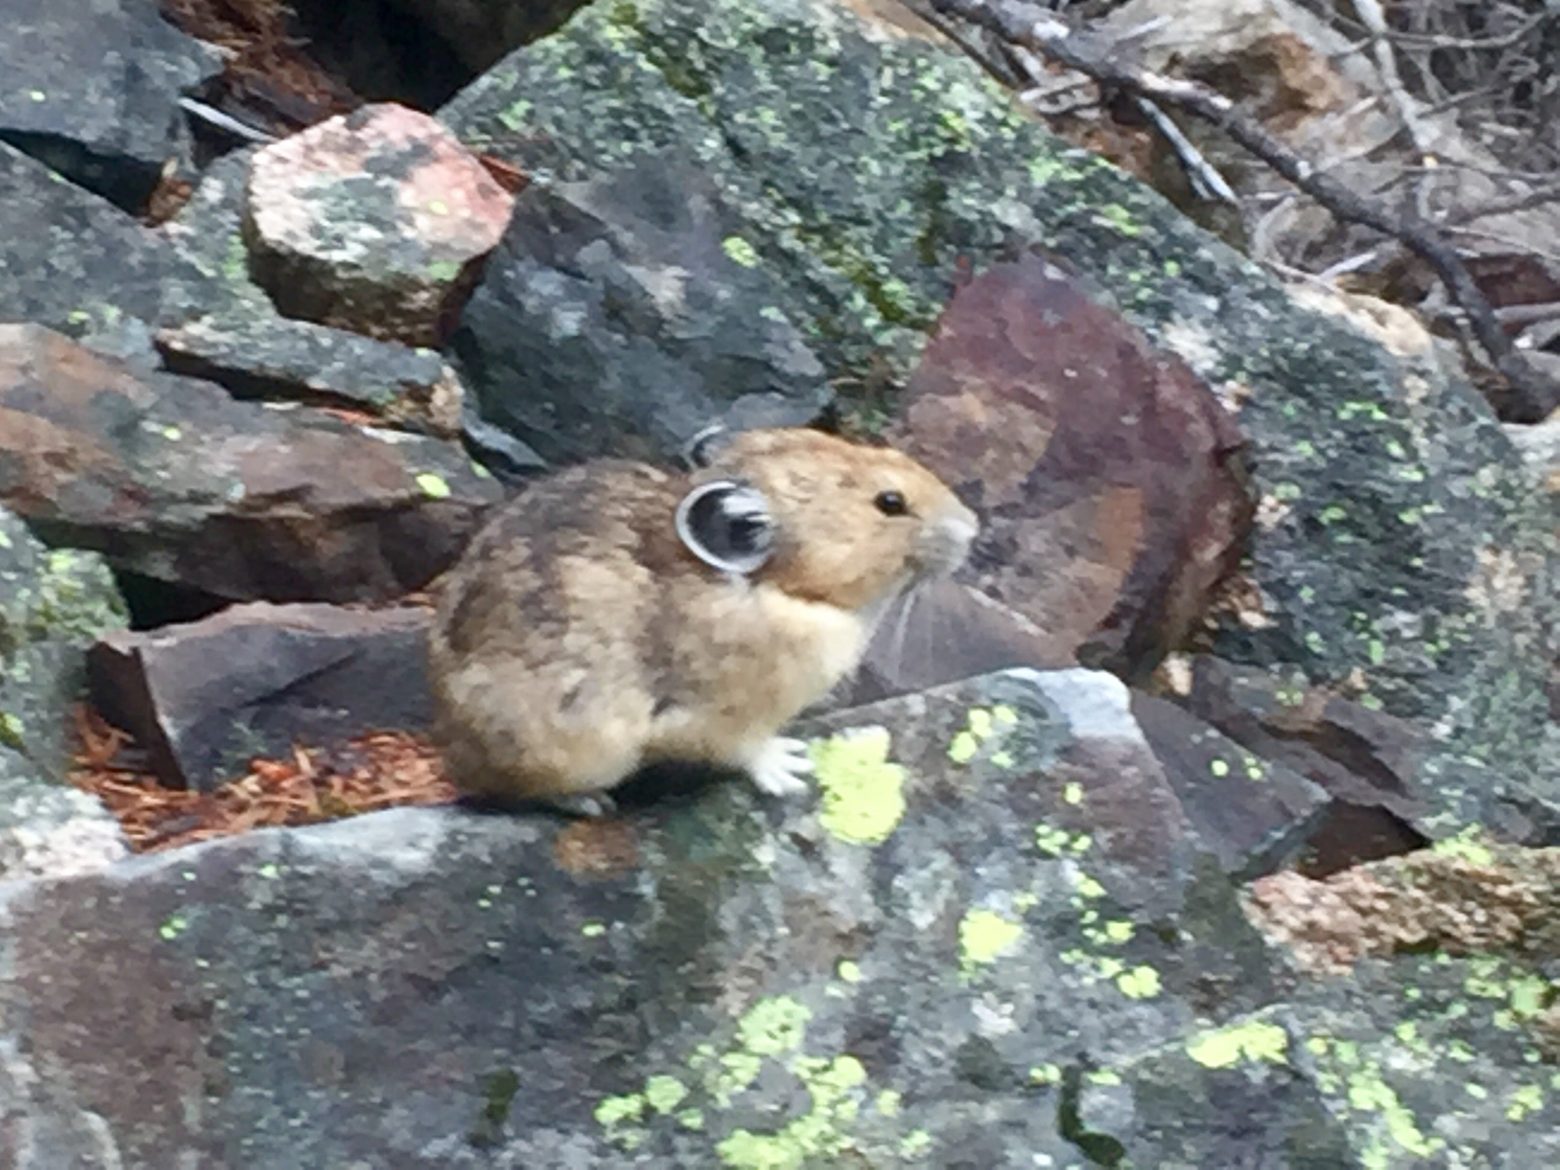 Tiny pika perched on the rocks next to the PCT